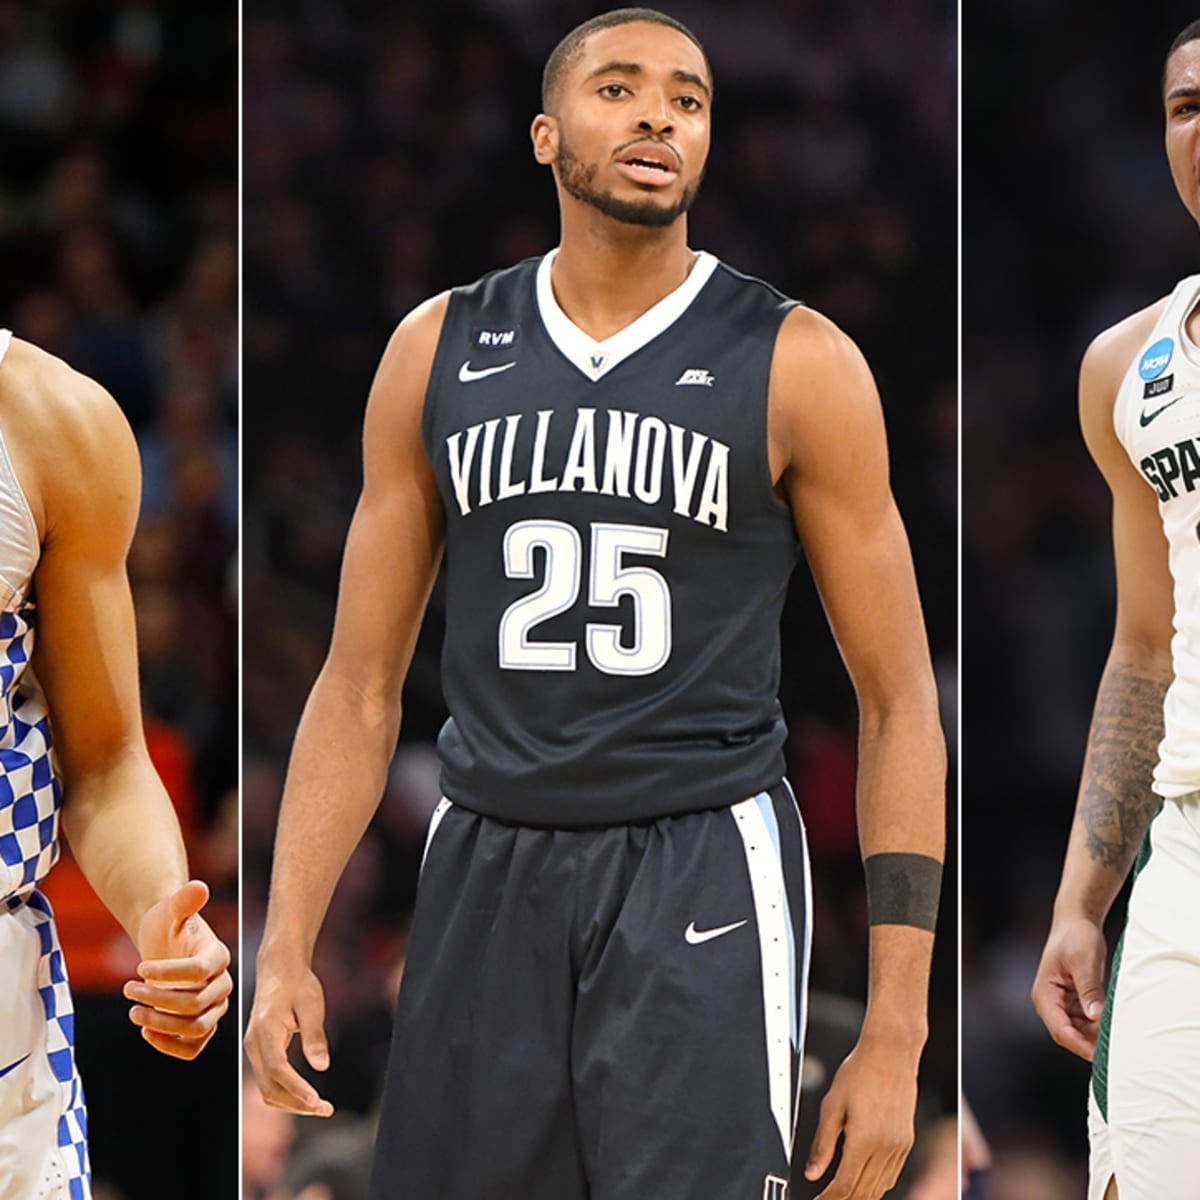 Ncaawildcats Mikal Bridges Can Be Translated To Italian As 